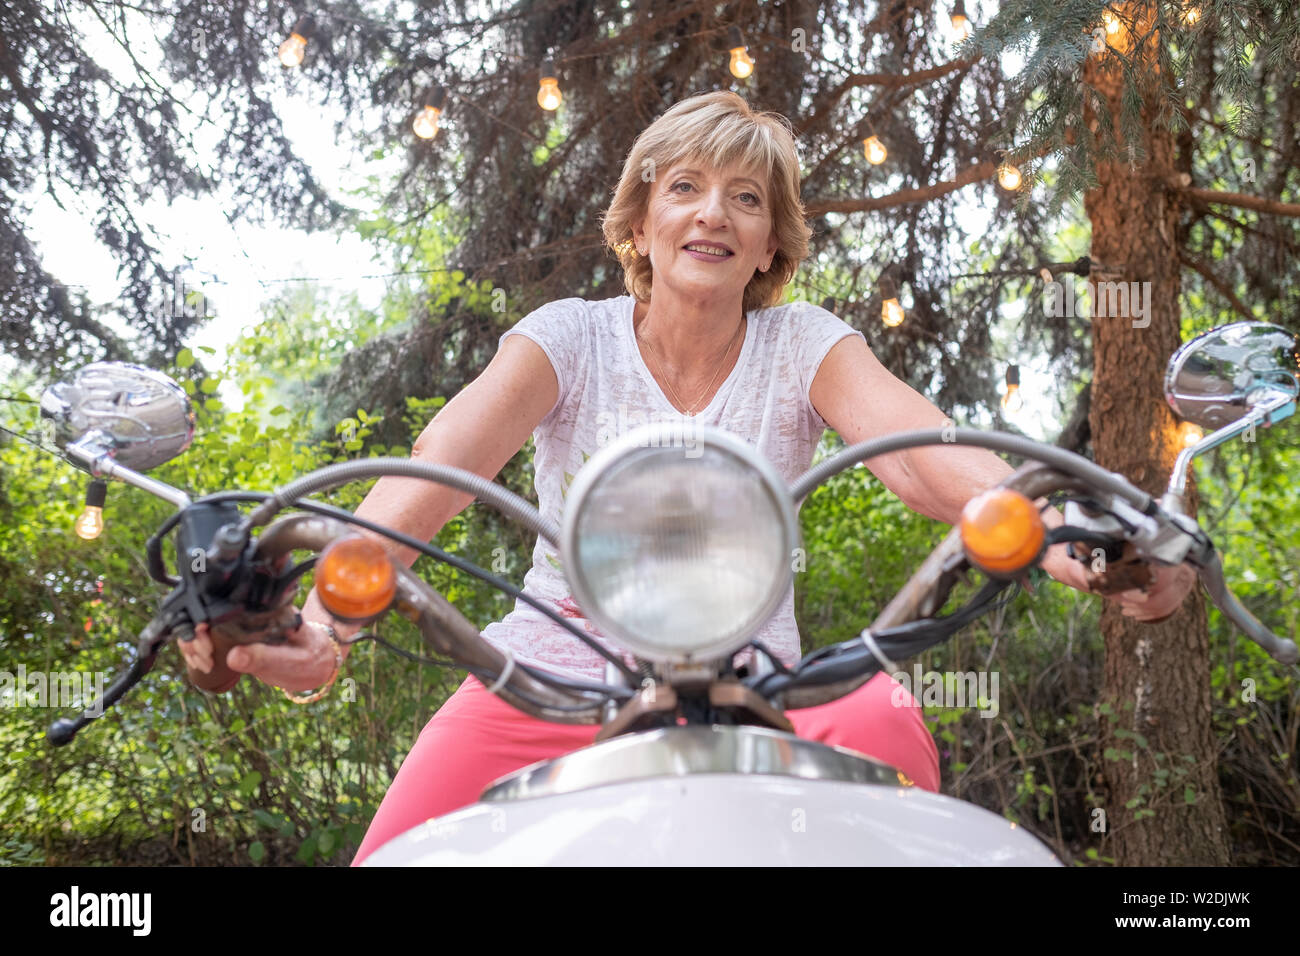 Cheerful senior woman riding a vintage scooter outdoor Stock Photo